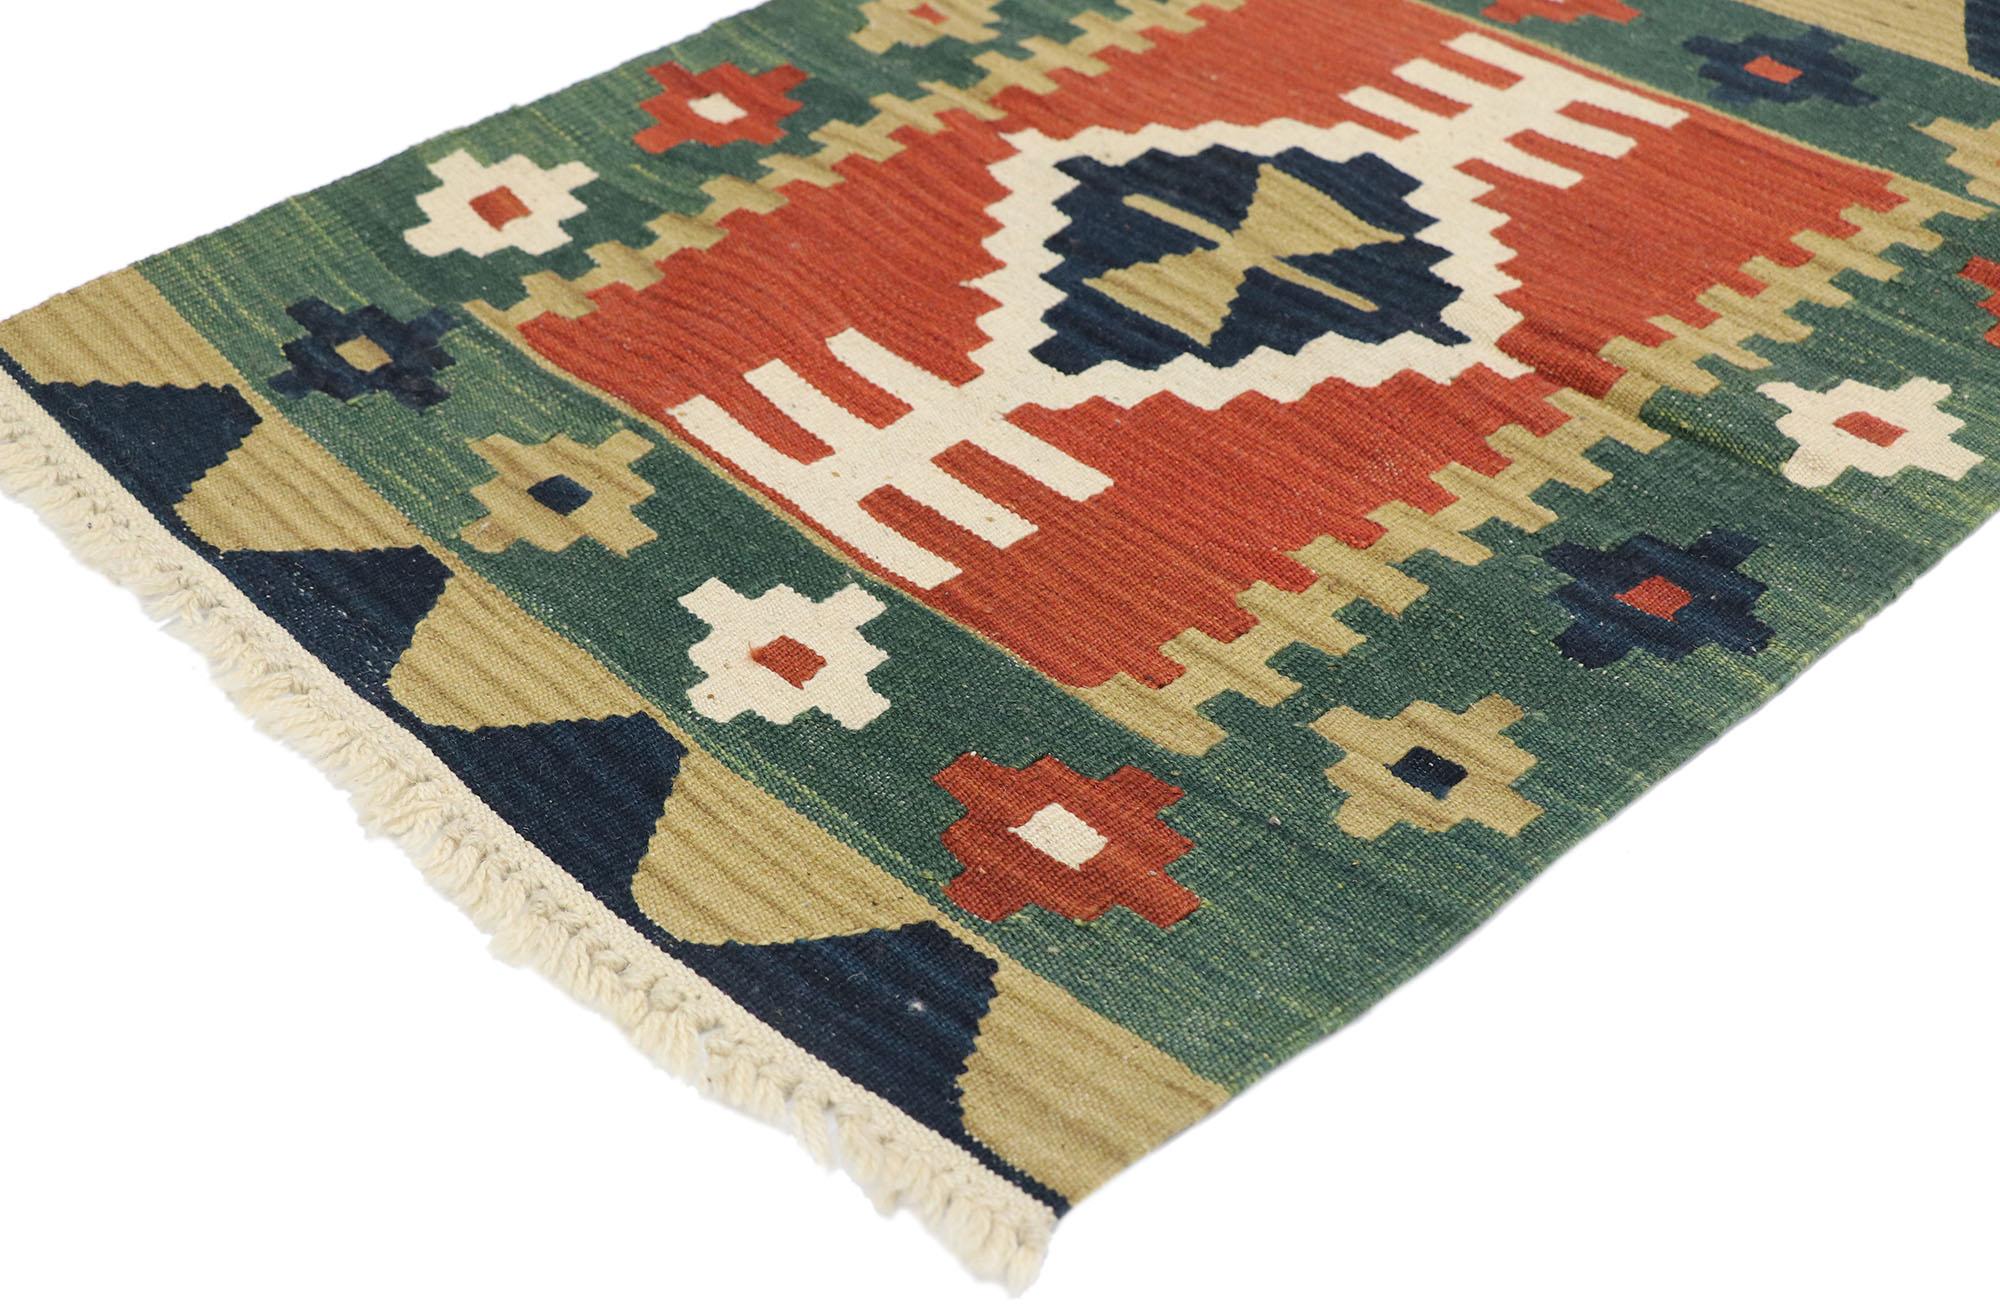 77901 Vintage Persian Shiraz Kilim rug with Tribal Style 02'00 x 02'10. Full of tiny details and a bold expressive design combined with vibrant colors and tribal style, this hand-woven wool vintage Persian Shiraz kilim rug is a captivating vision of